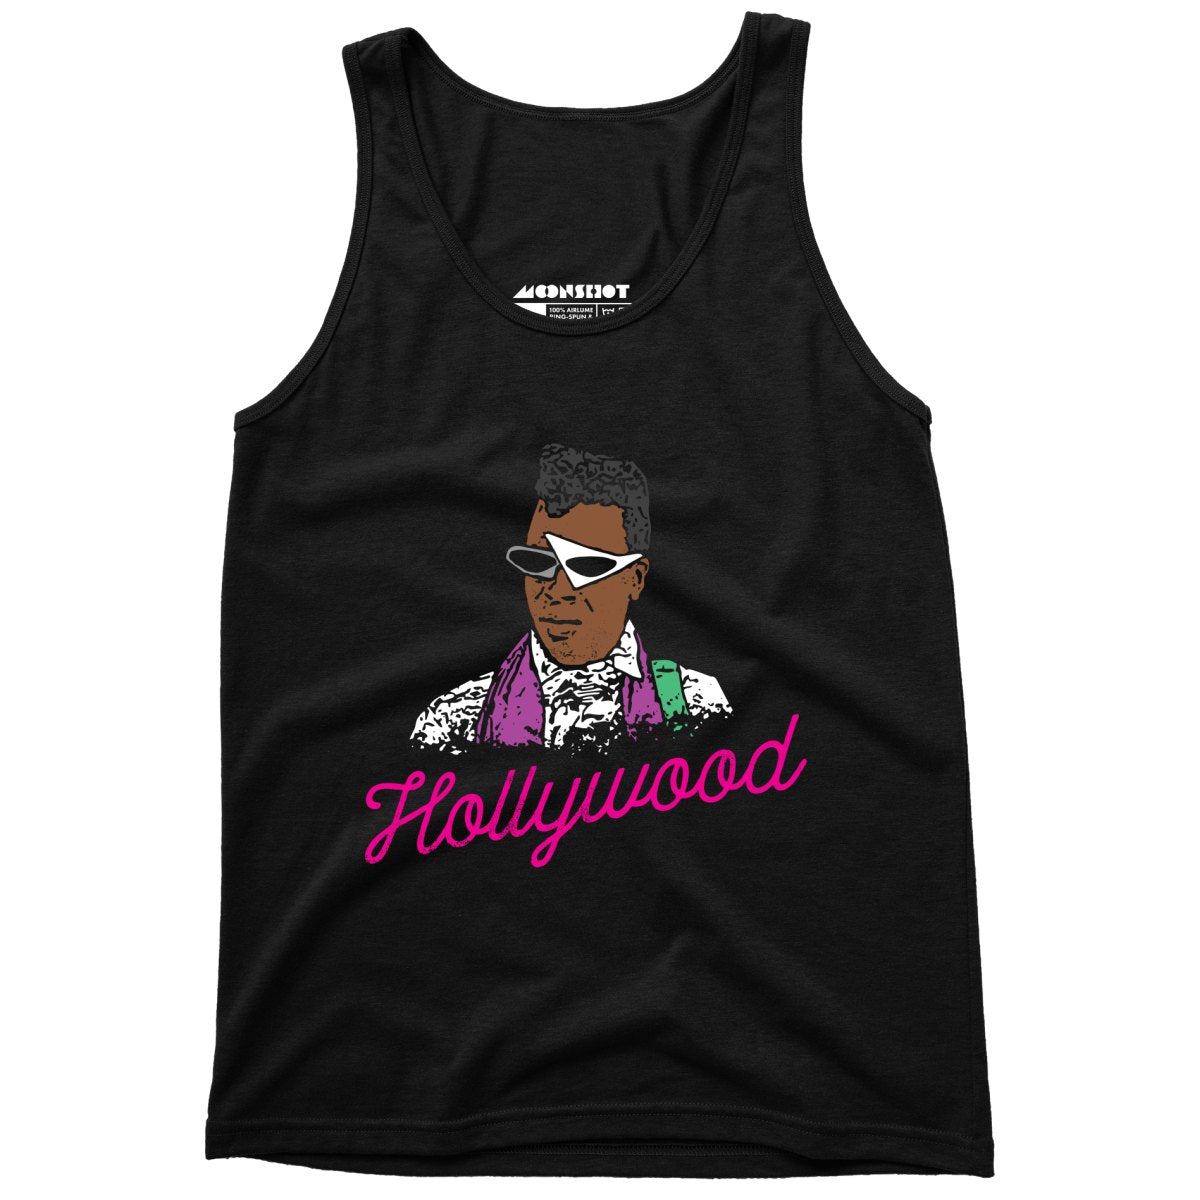 Hollywood - Mannequin - Unisex Tank Top